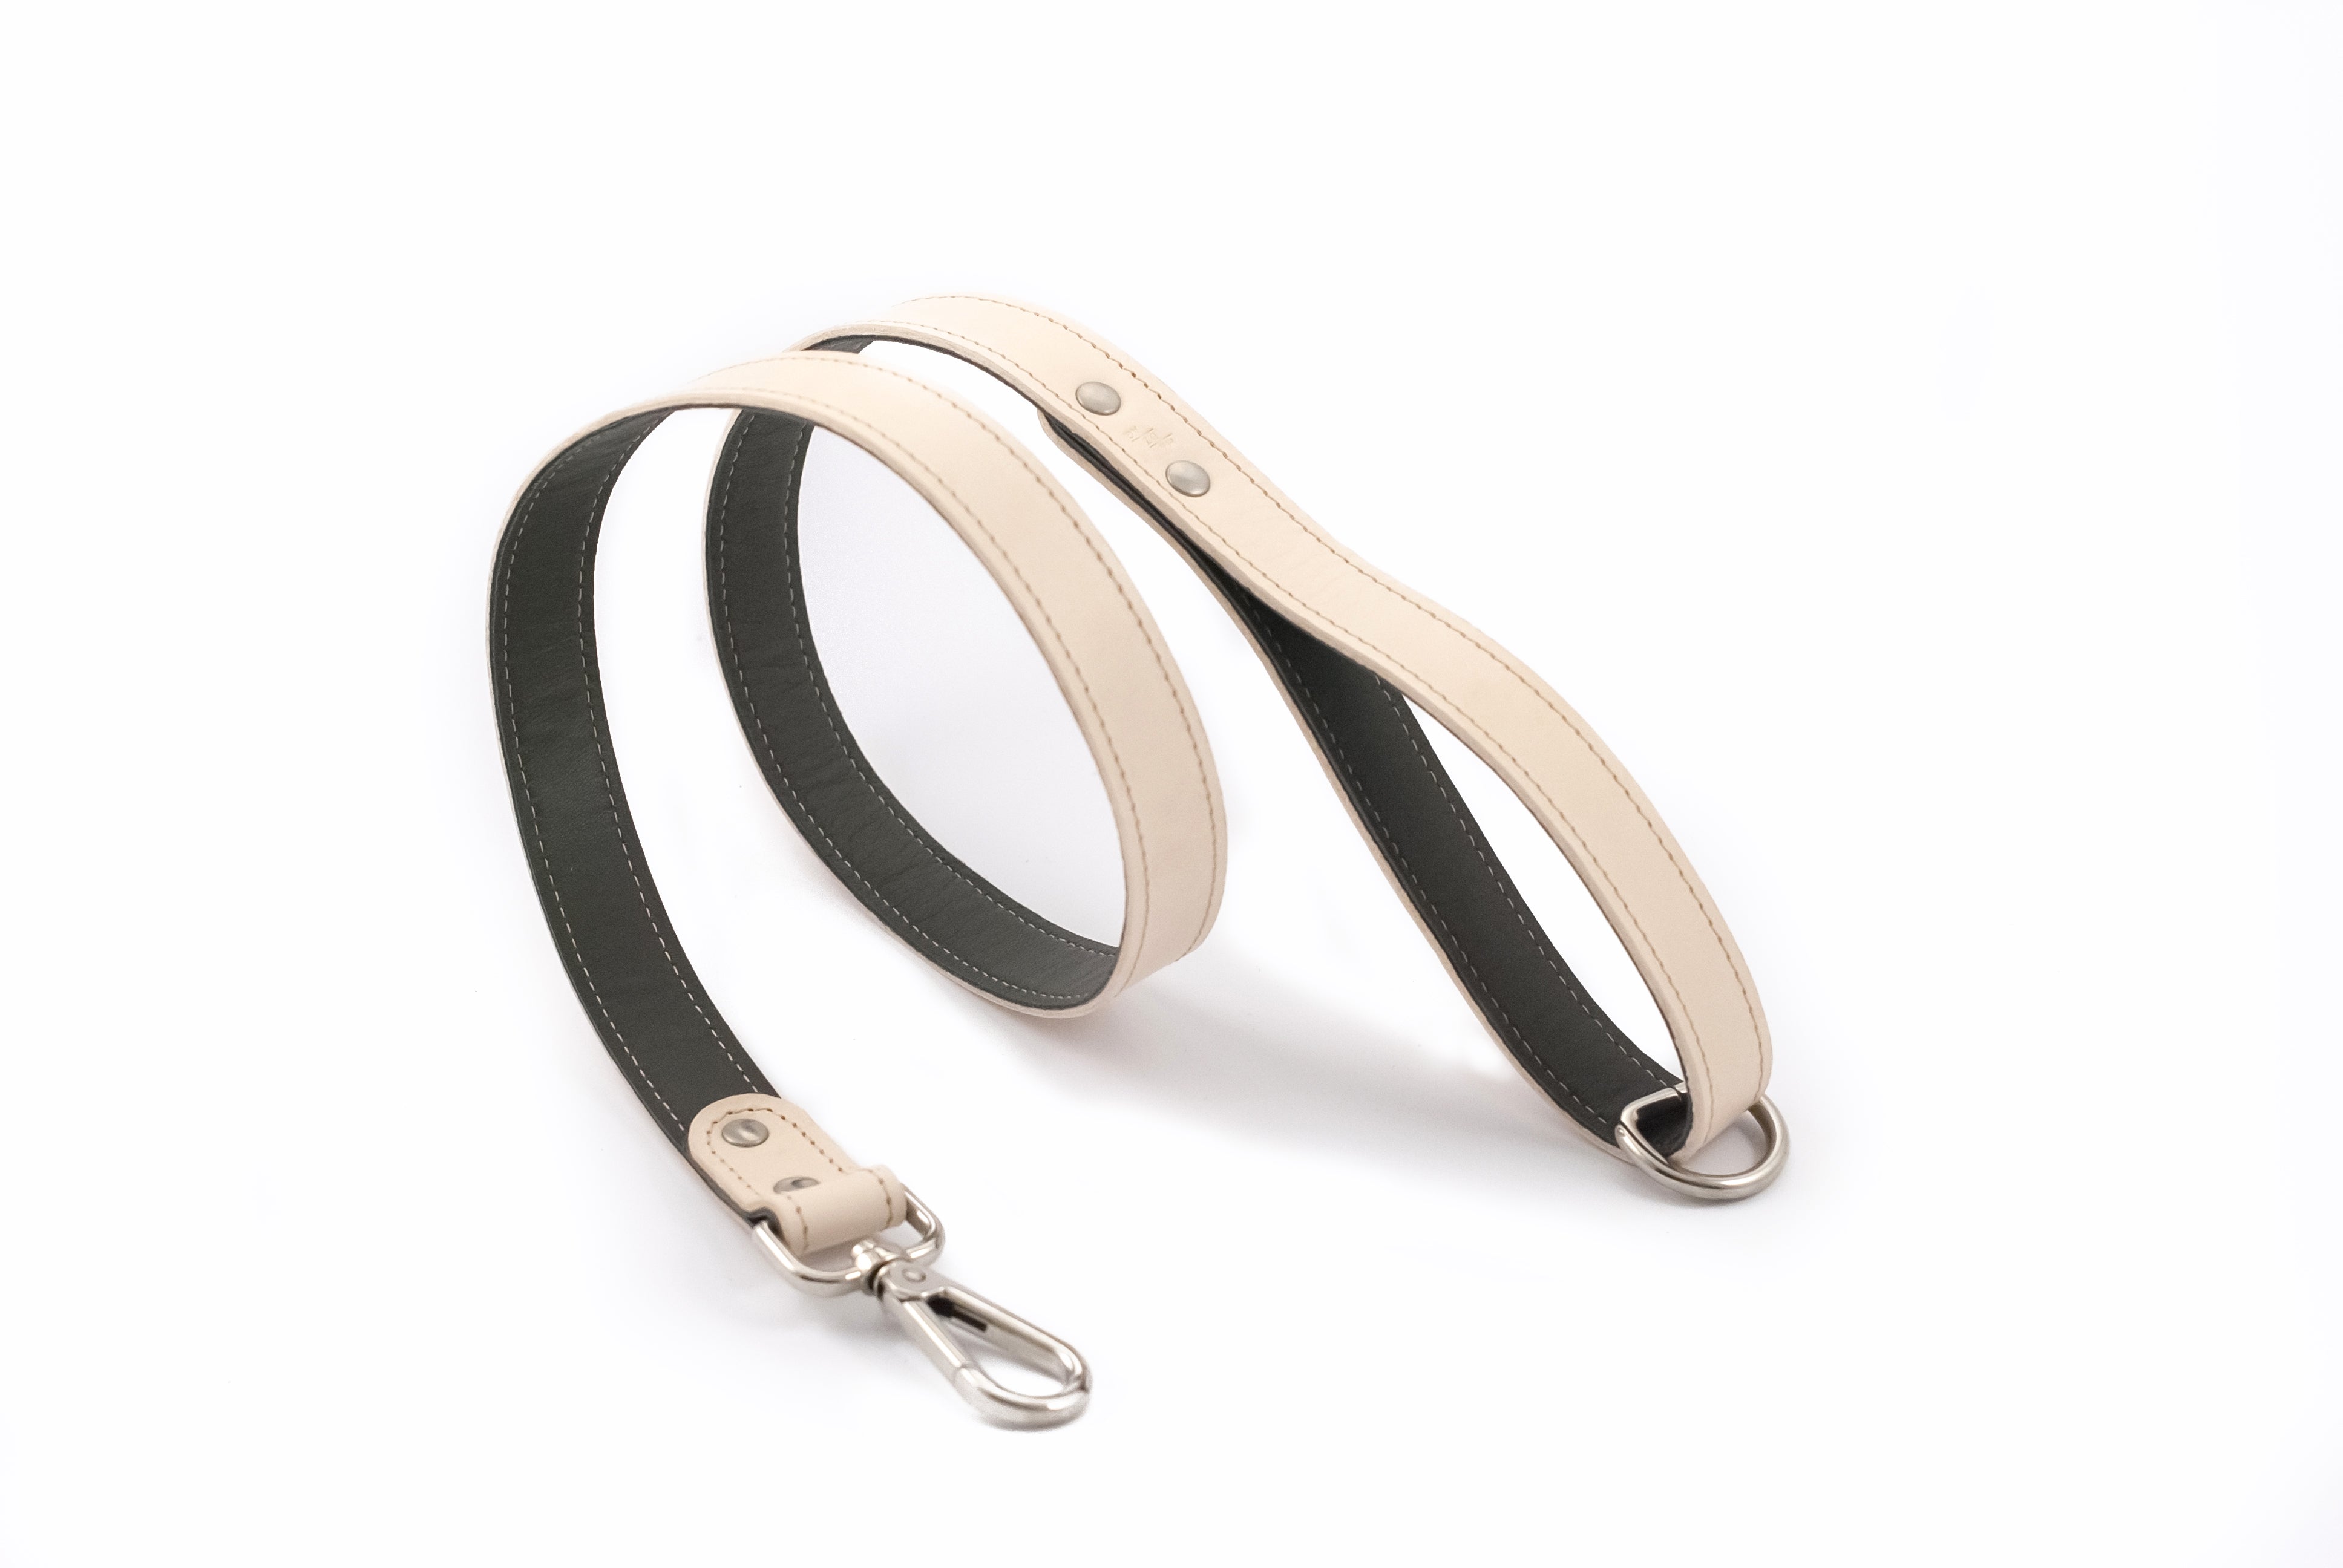 Simple Leash- for taller dogs and those who prefer to keep their dogs closer